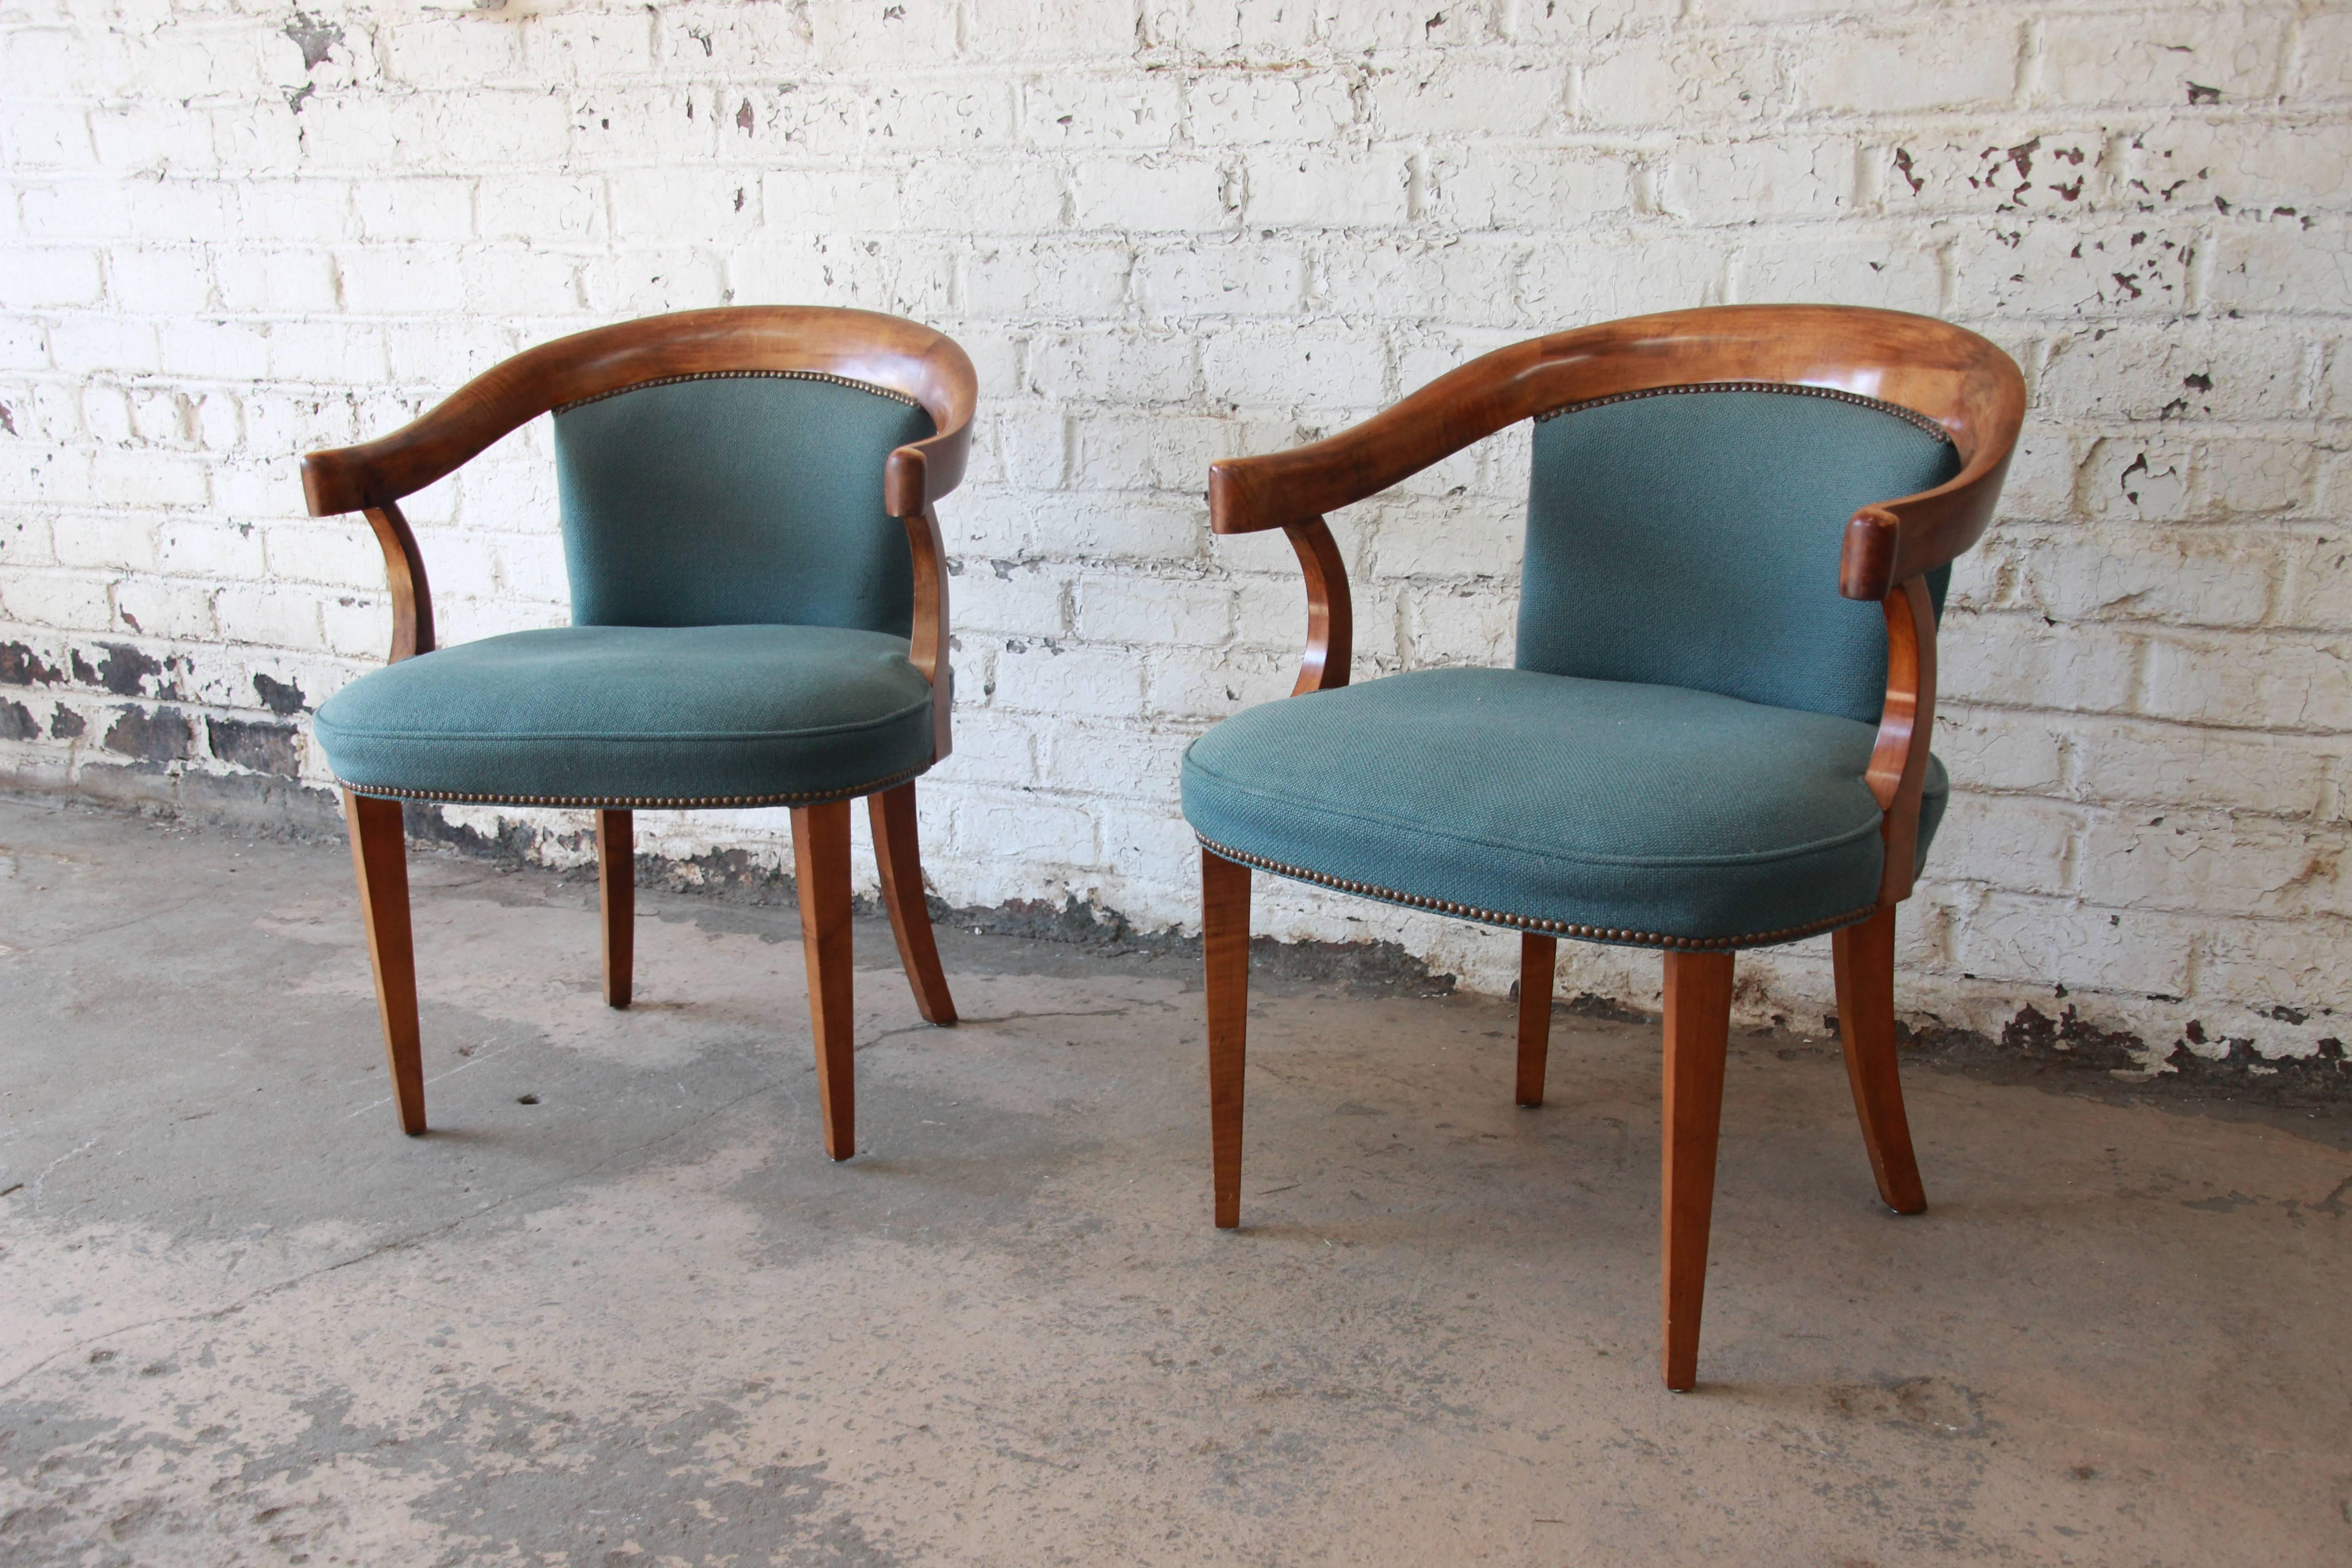 Stunning pair of Baker Furniture tiger maple armchairs. The chairs have a bentwood design and are made from solid maple with and clean studded upholstery. The chairs have an elegant design with tapered legs. The chairs have a firm seating and are